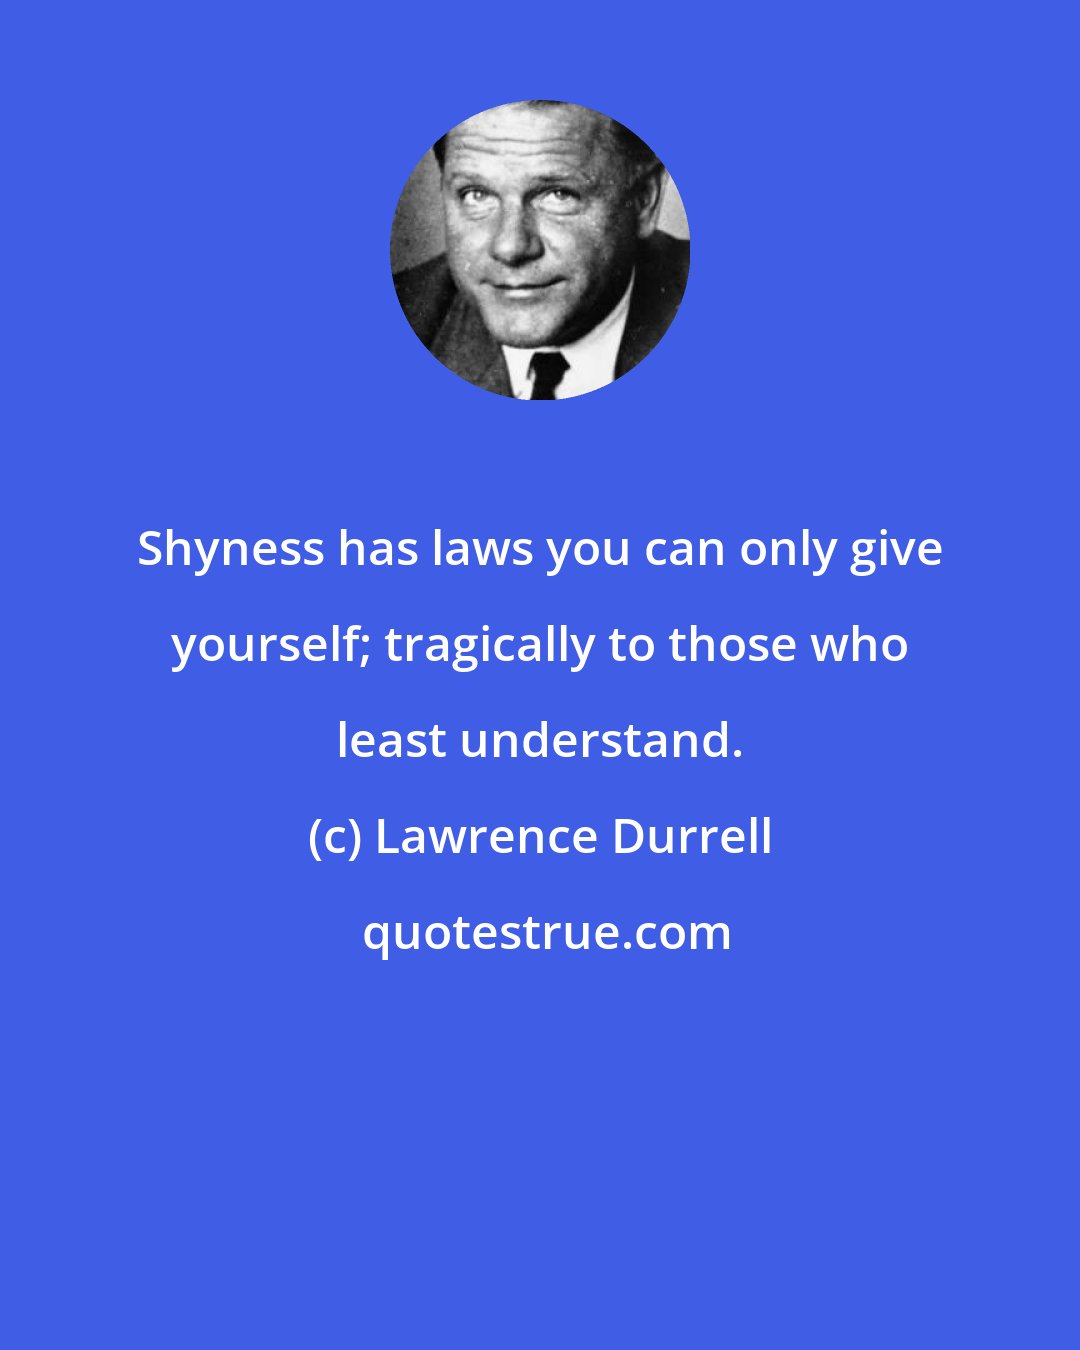 Lawrence Durrell: Shyness has laws you can only give yourself; tragically to those who least understand.